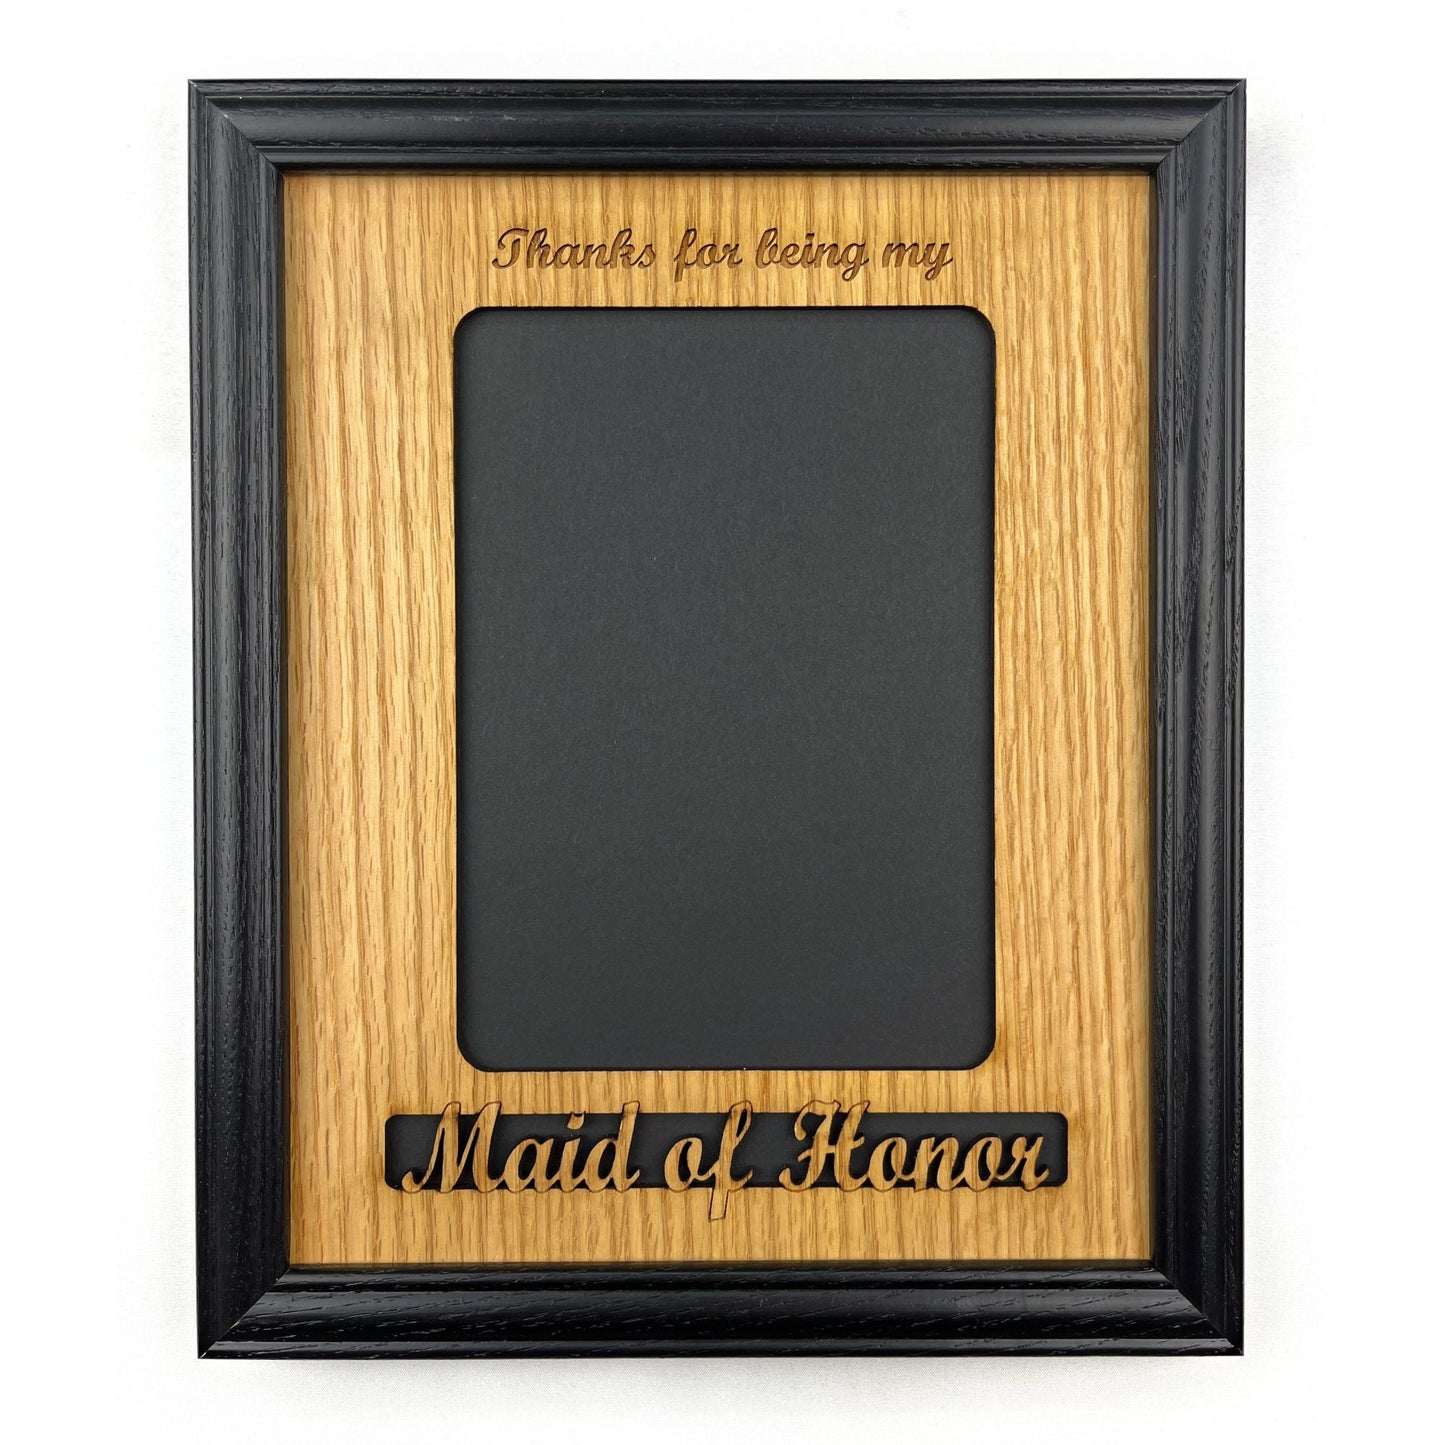 Maid of Honor or Bridesmaid Picture Frame - Legacy Images - Picture Frames